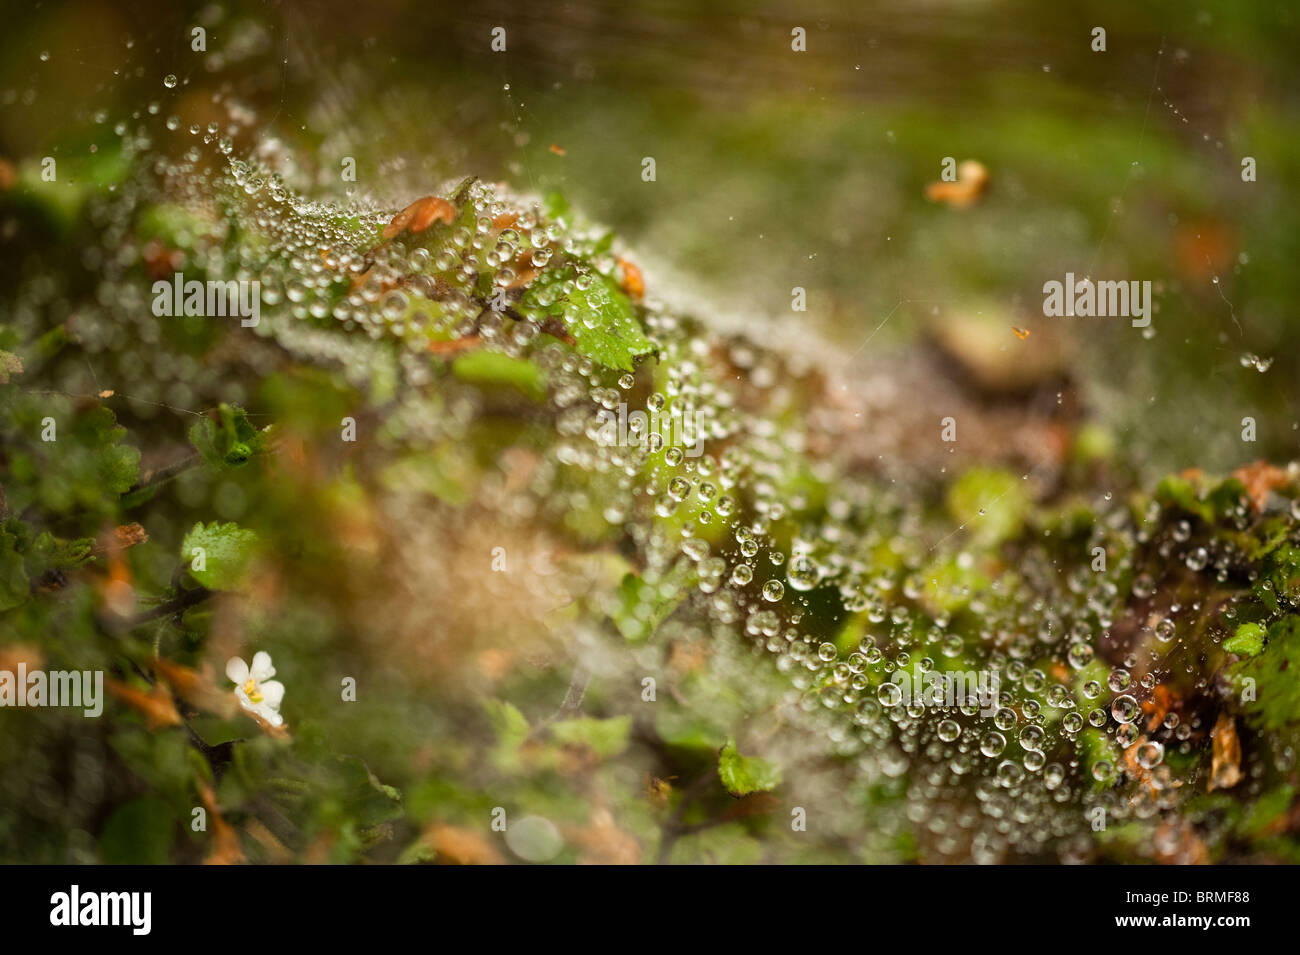 Close up of Bacopa white plants covered by spiders' webs with water droplets Stock Photo